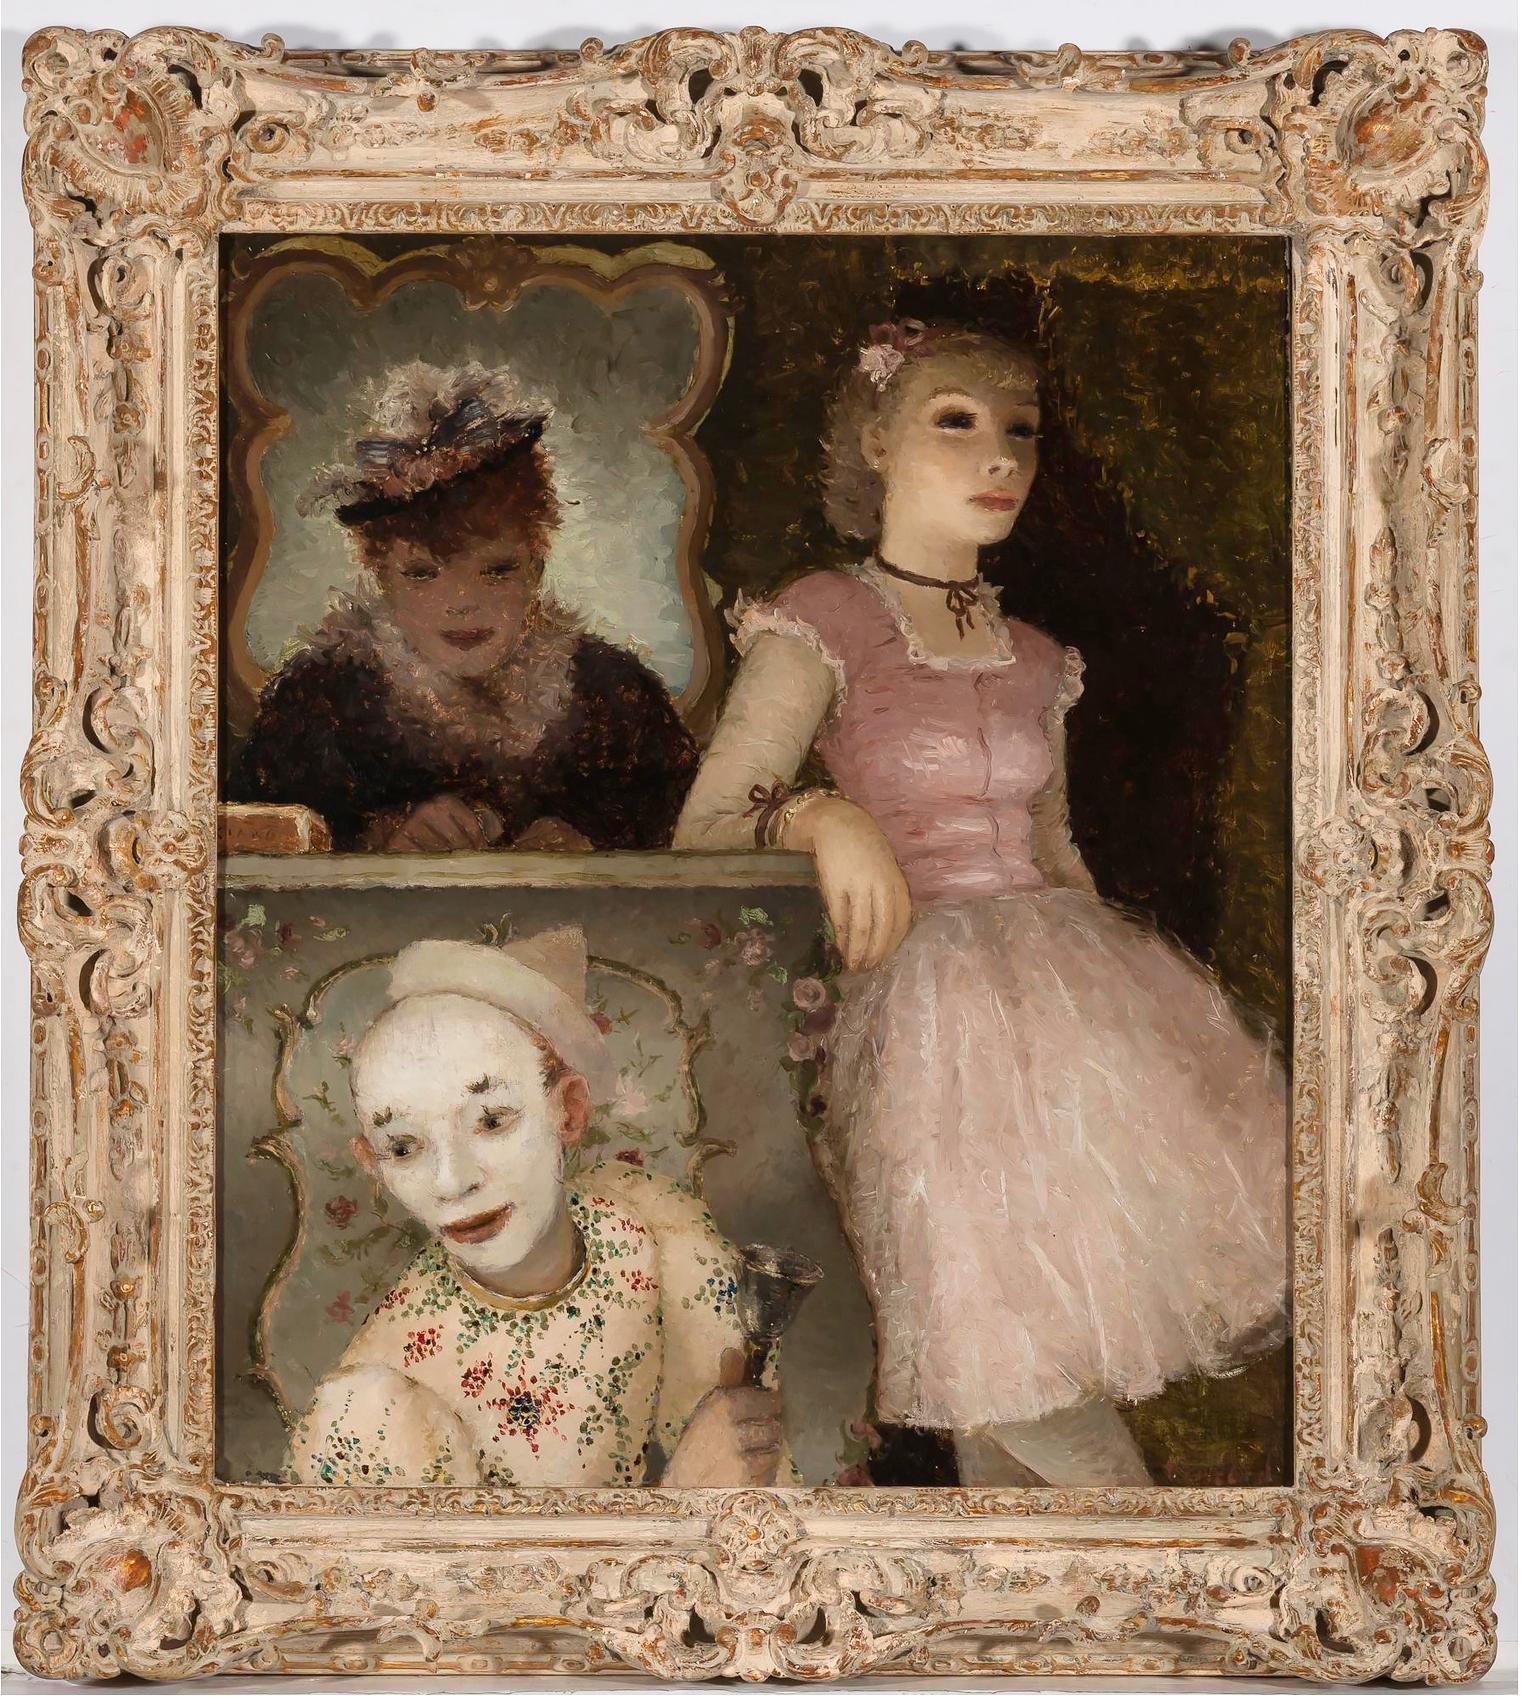 Ballerina, Clown and  Festival Performers Like Degas - Painting by Dietz Edzard